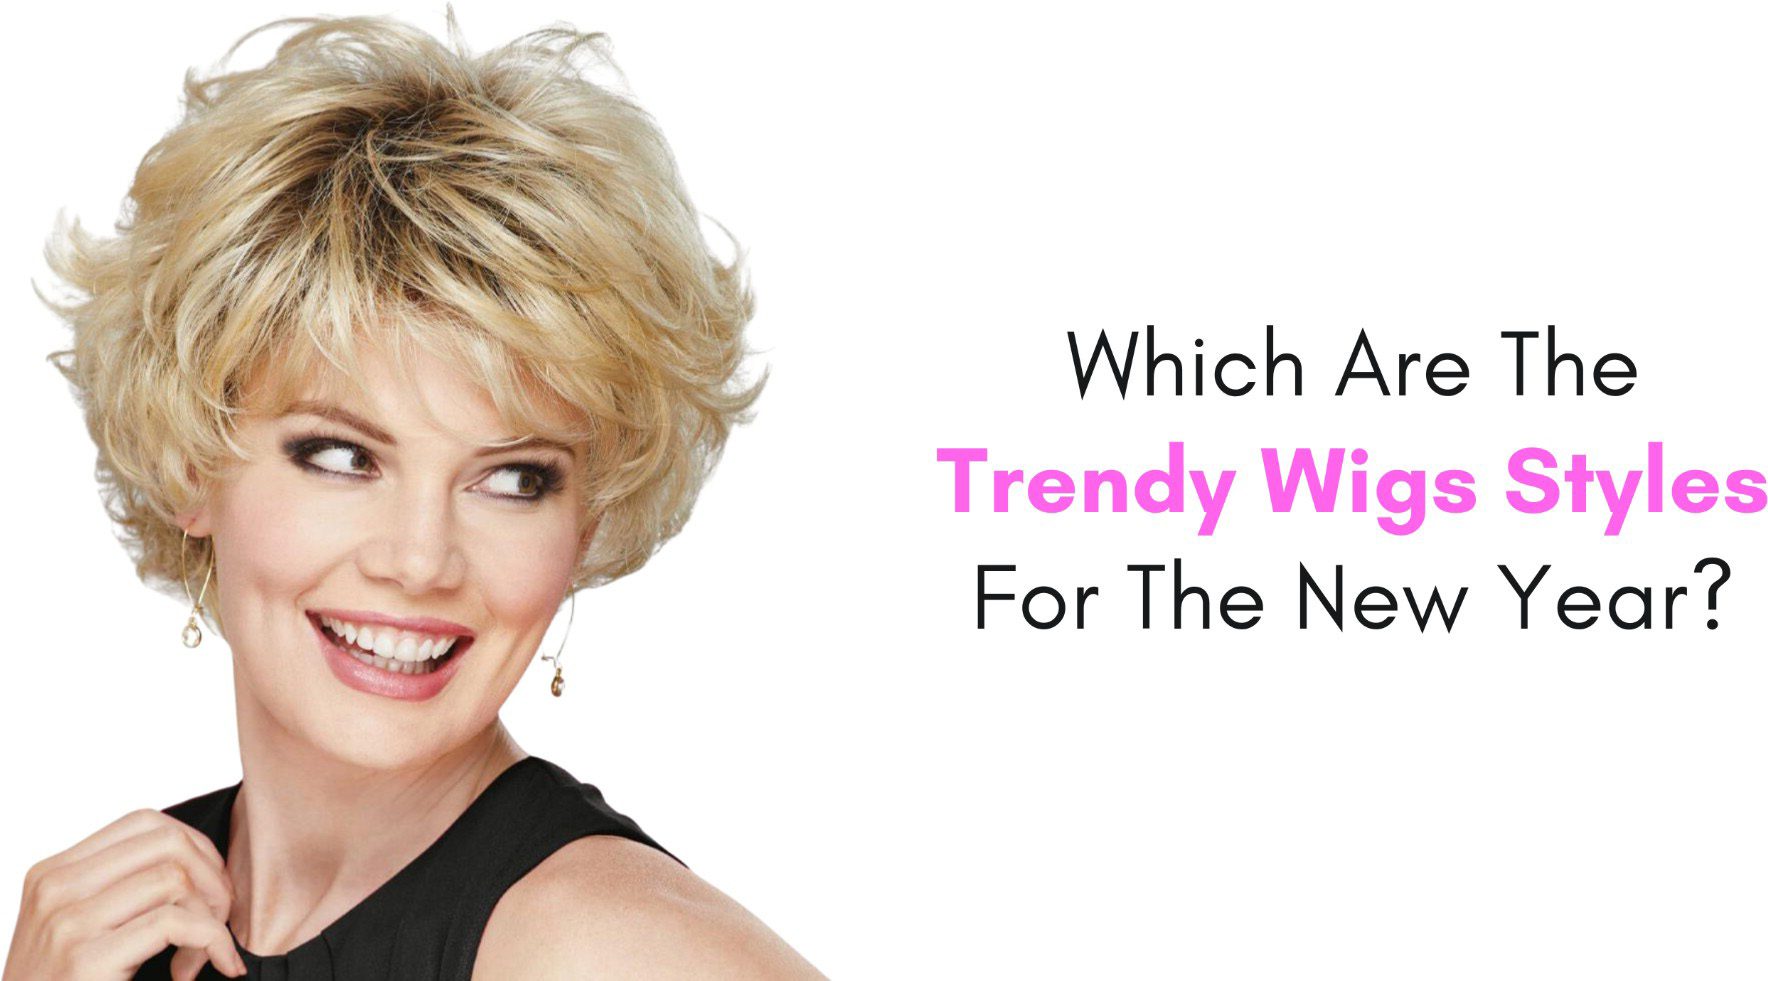 Which Are The Trendy Wigs Styles For The New Year?